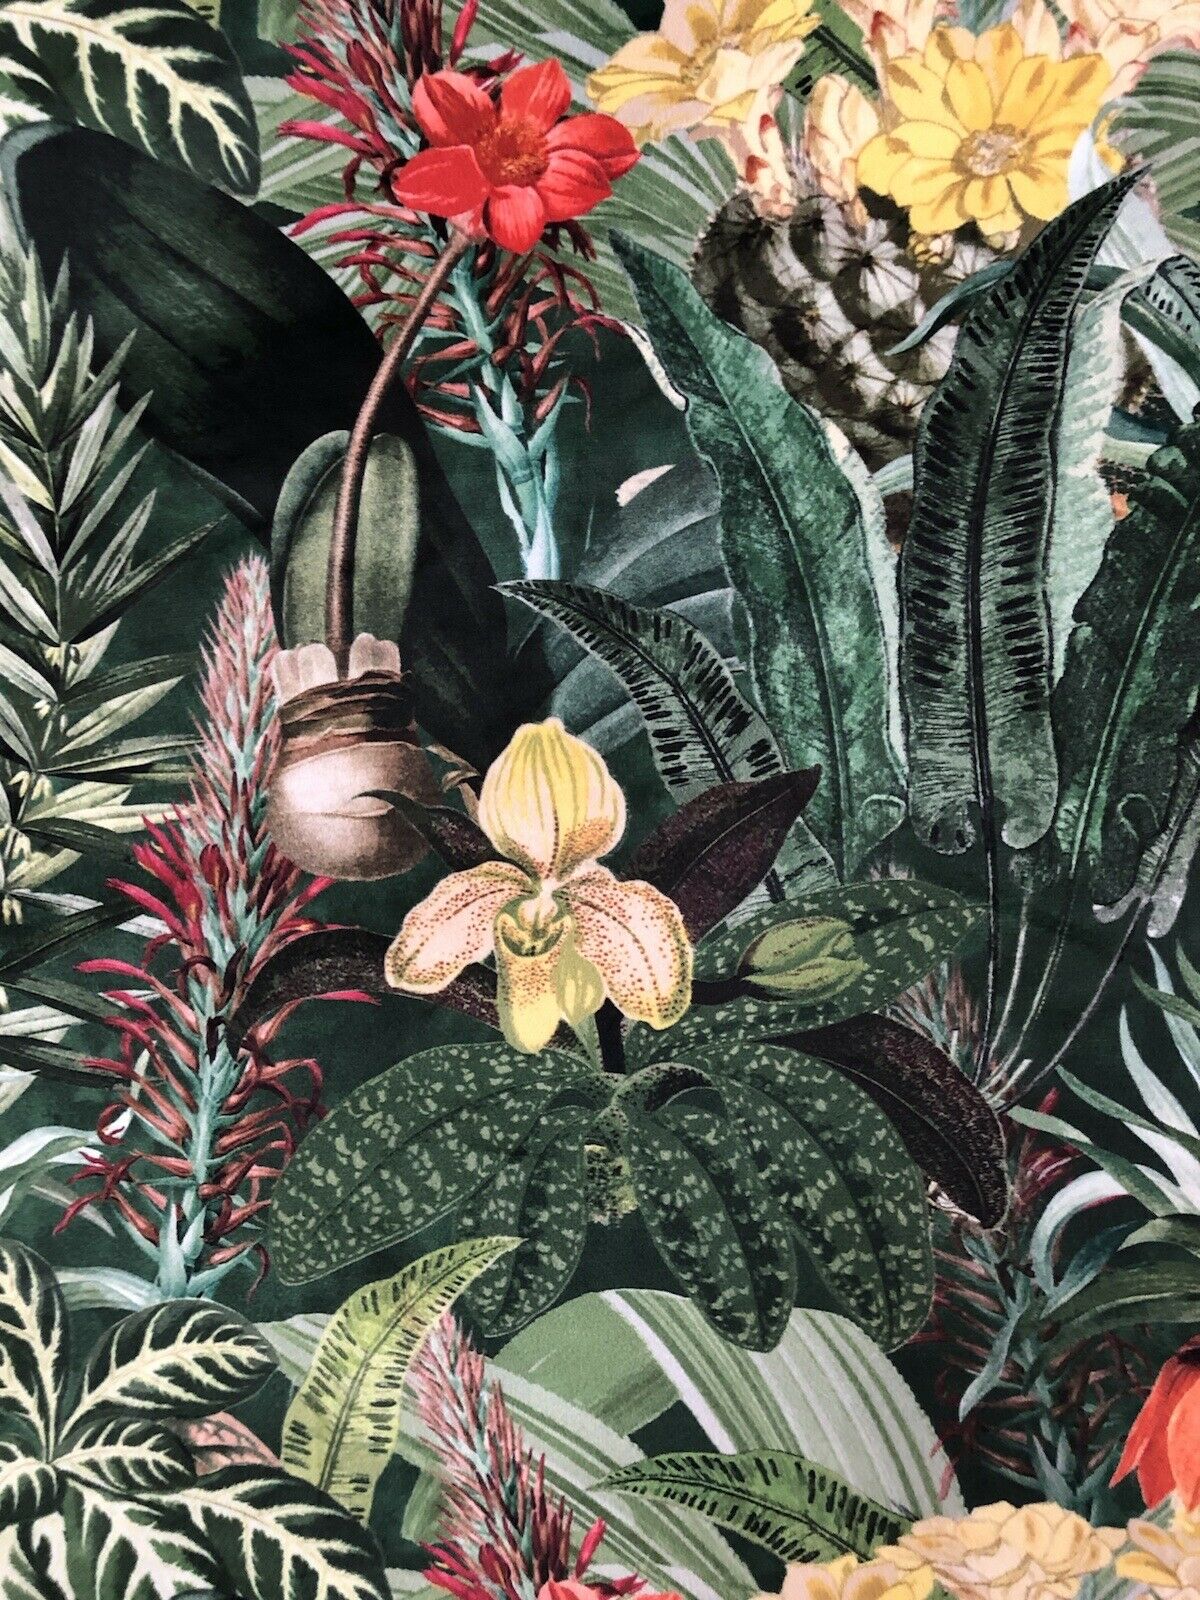 Greenhouse Floral fabric By The Meter Green Velvet Sewing Material Plants Greenery Leaves Jungle Orchid Flowers Pattern Textile for upholstery pillows cushions crafts